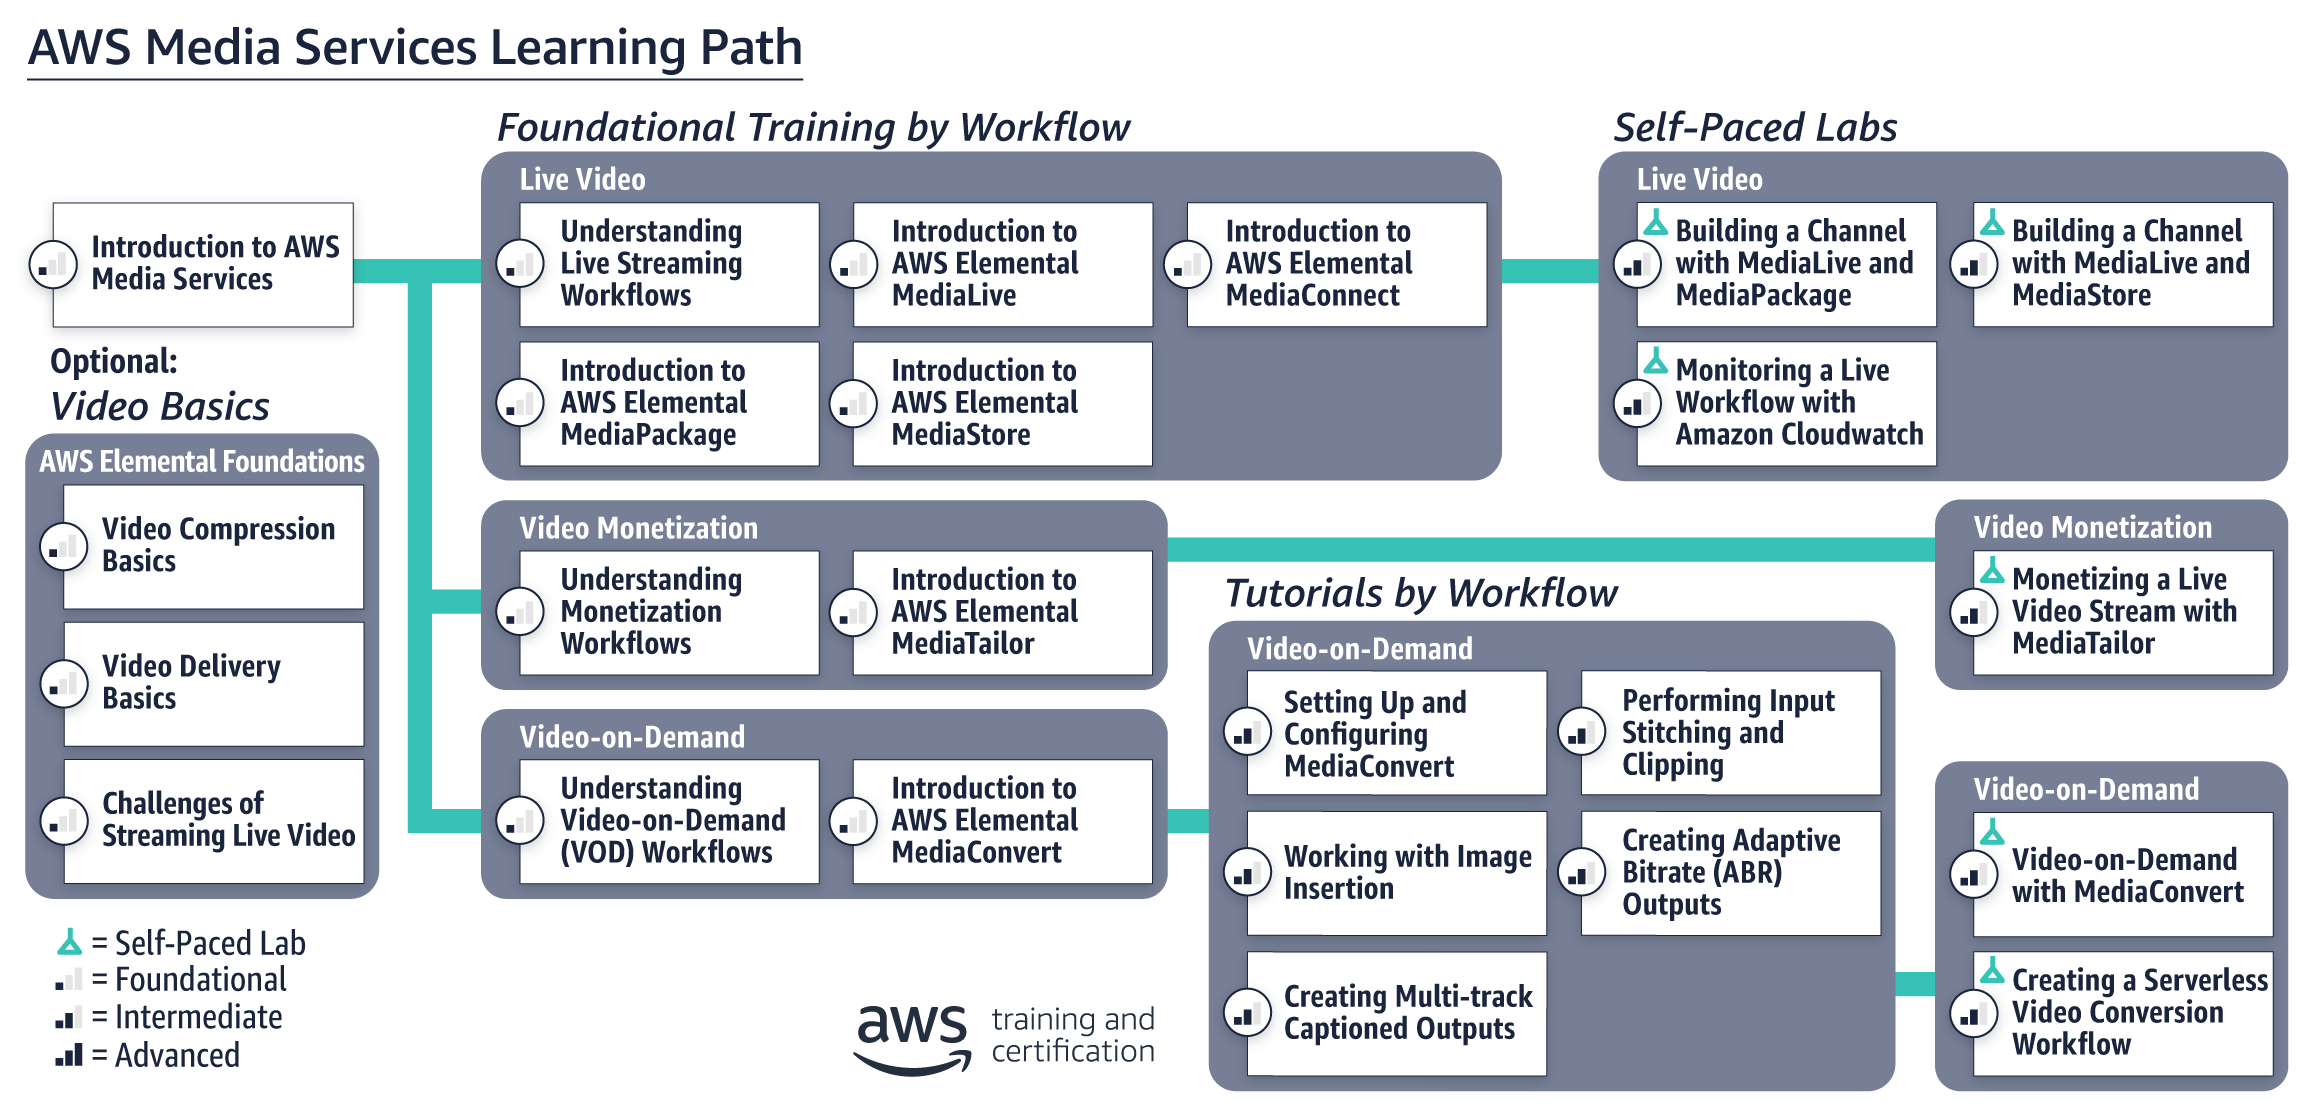 path_aws-media-services-v3.2.568a14dce5294a133db4eb0854cf4662c32c167f.png